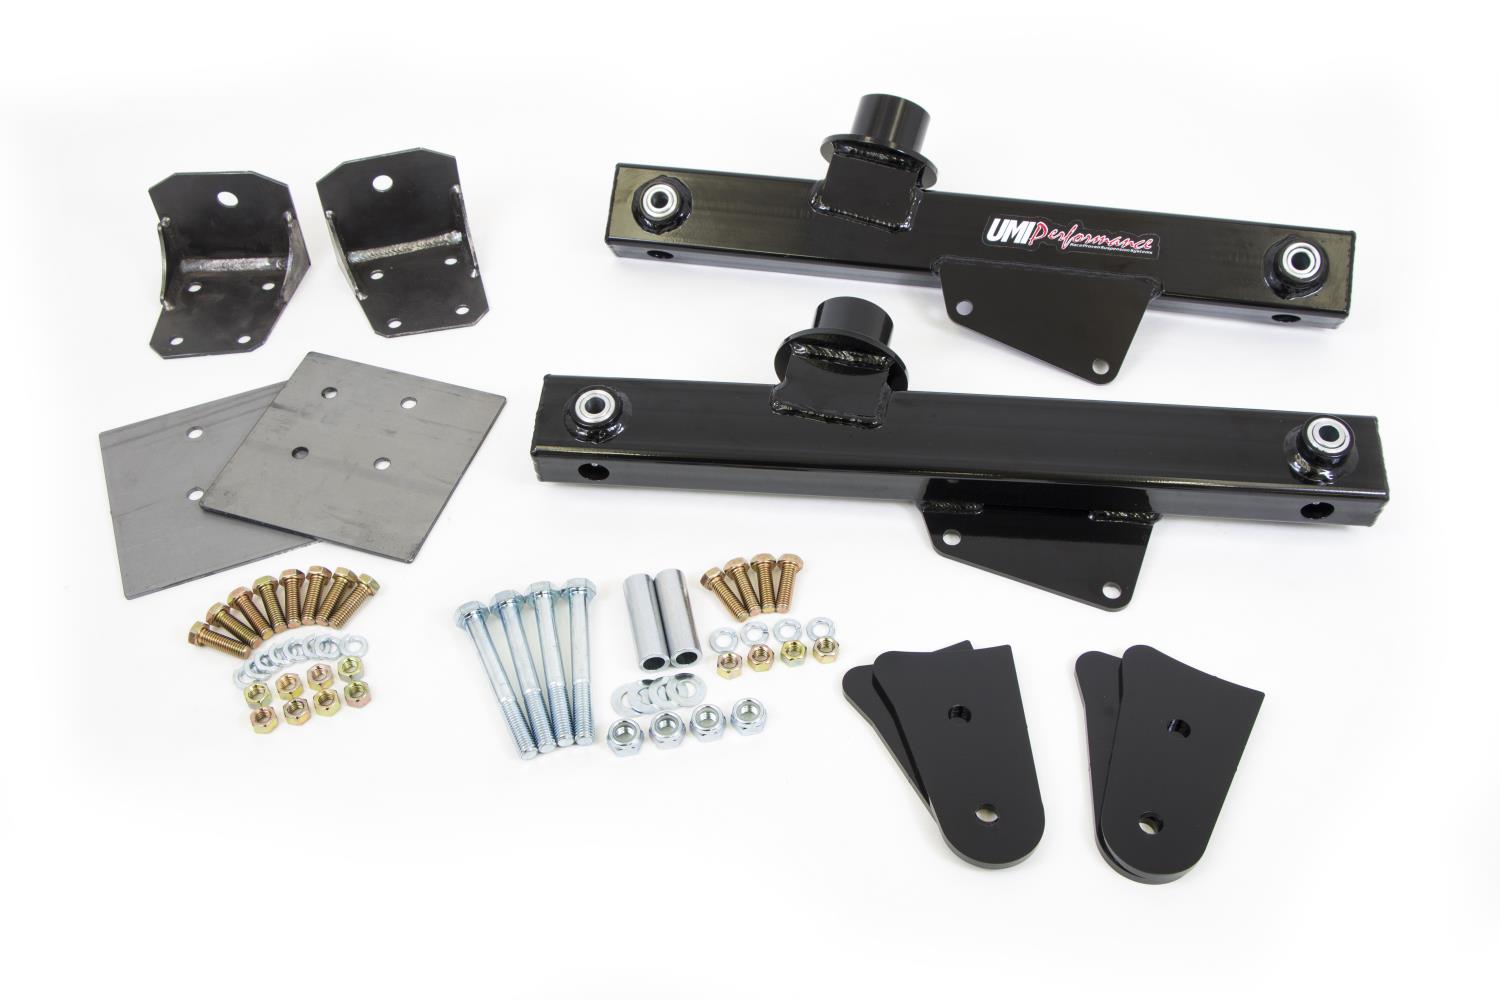 The Strip Grip Kit from UMI includes everything you need to safely lower your track 60 ft. times and